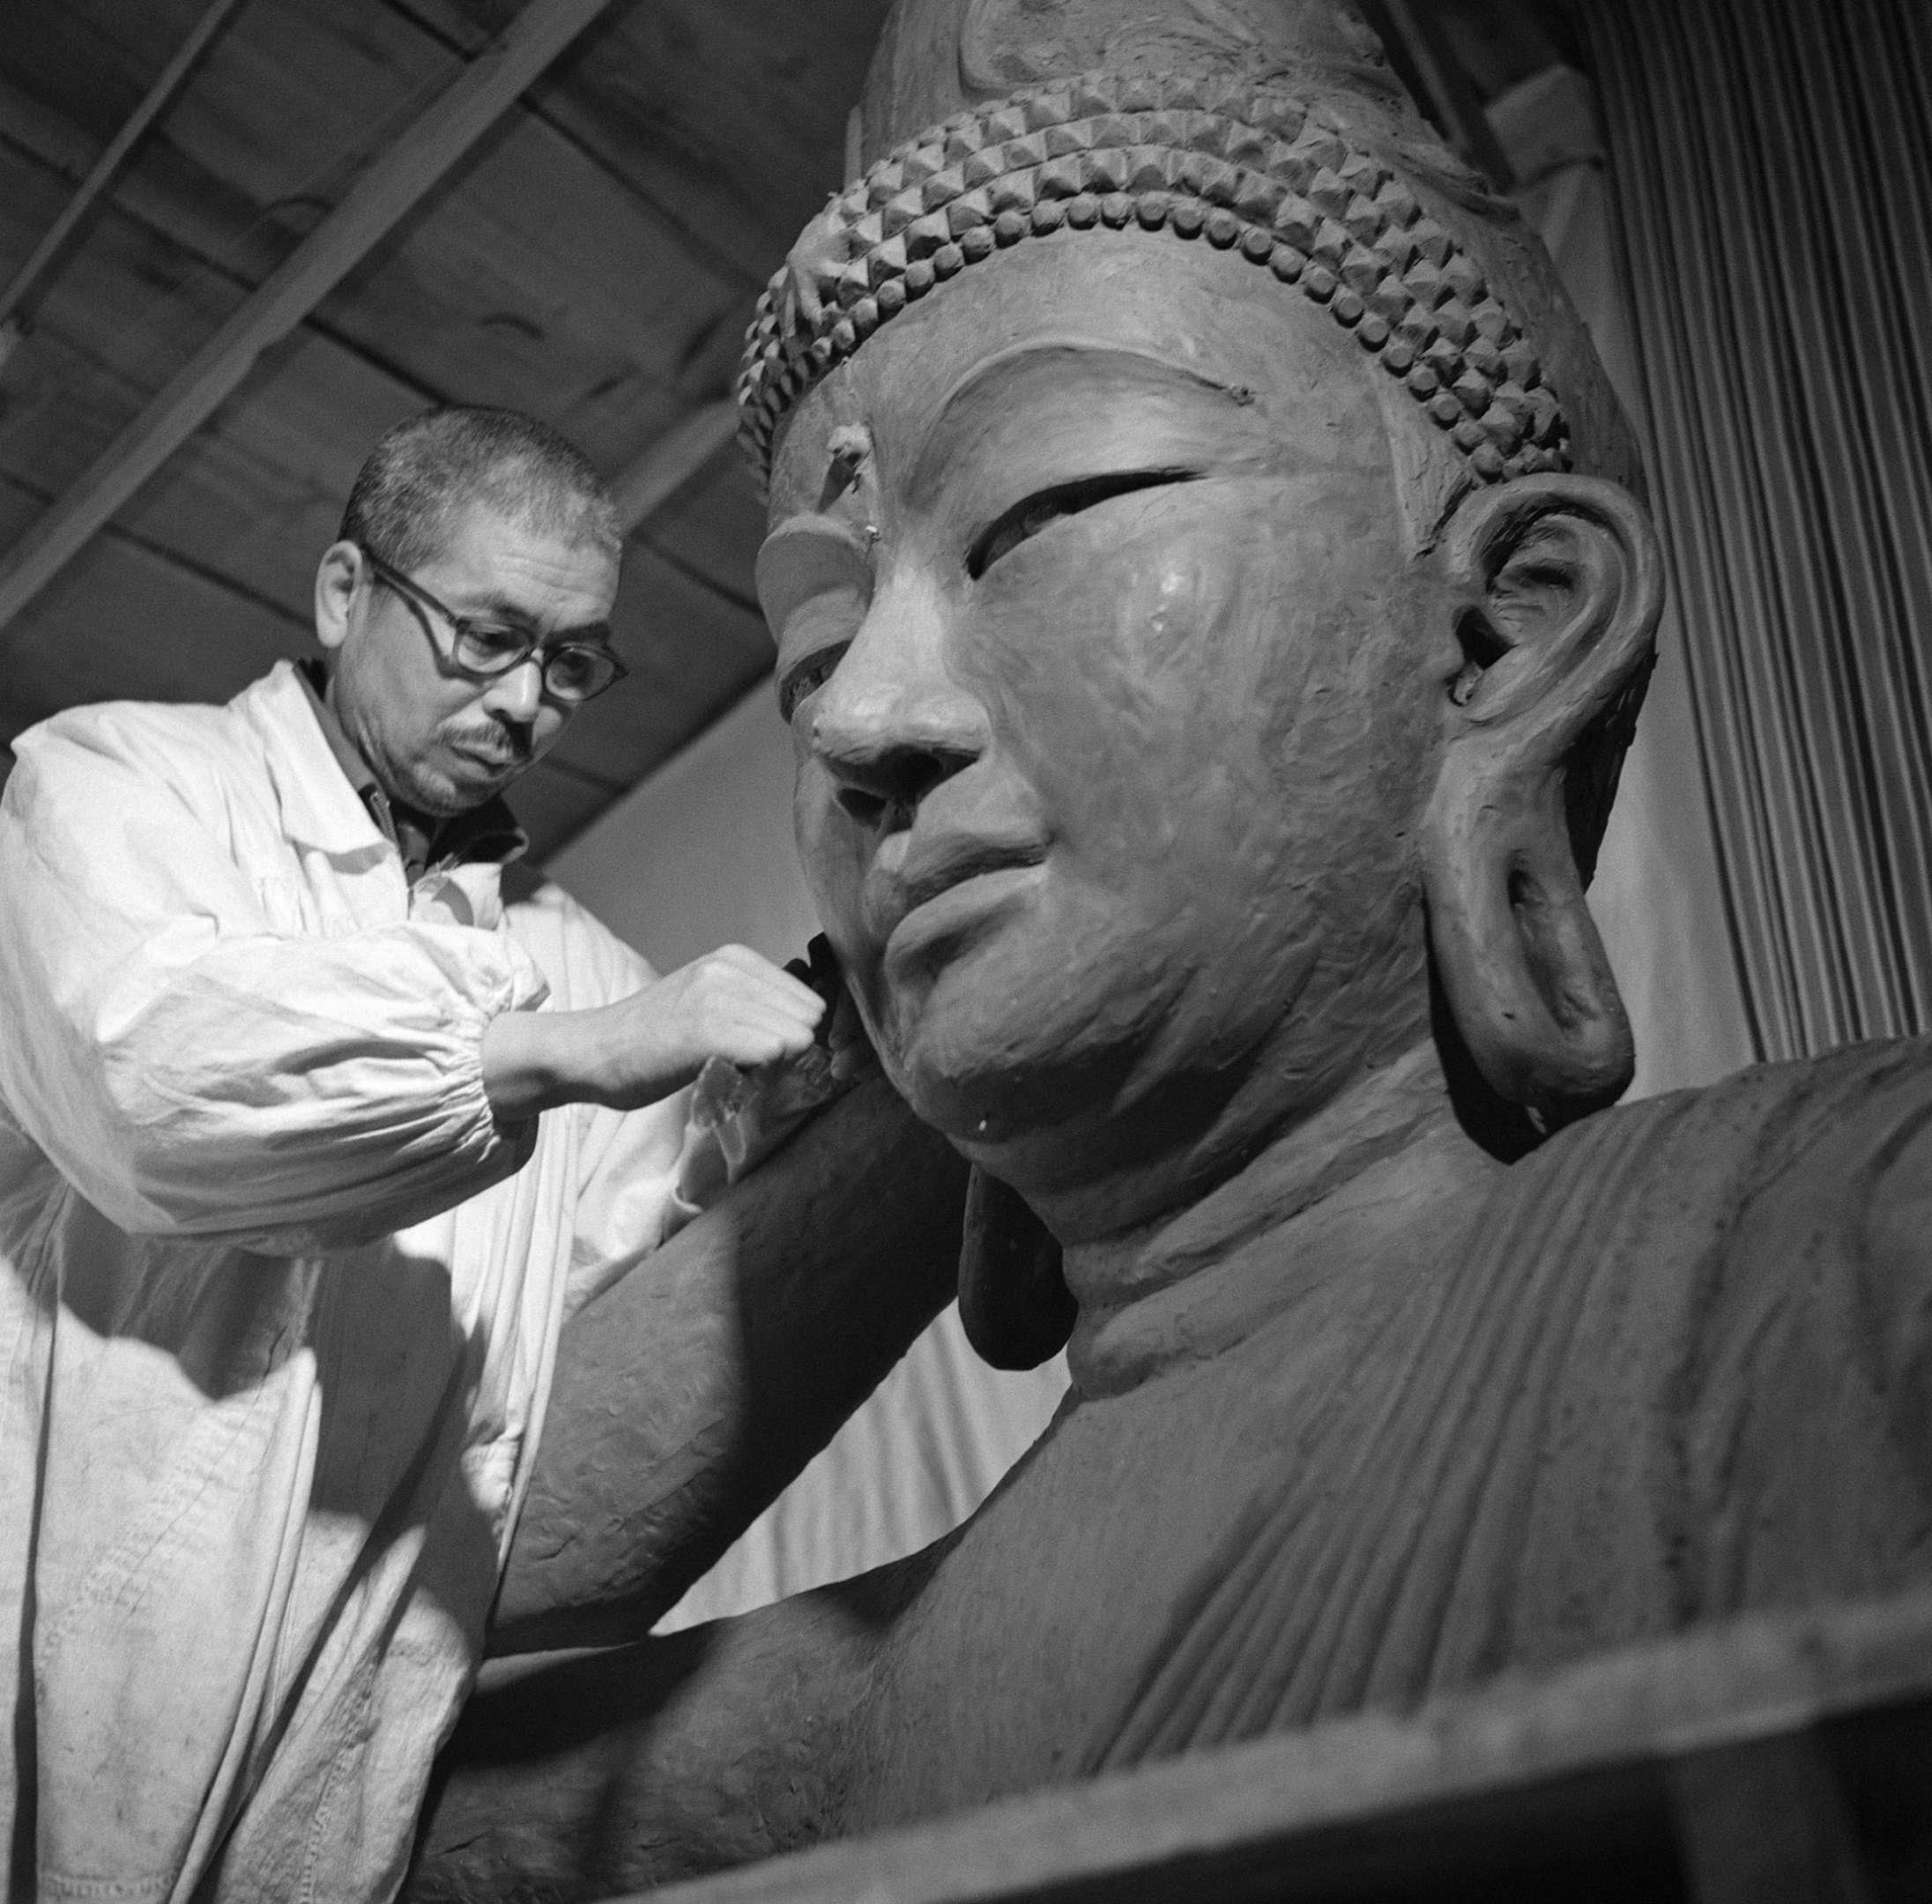 Shinjo, with sculpting implements in hand, wearing a smock over his clothing, stands sculpting a very large bust of a smiling buddha.